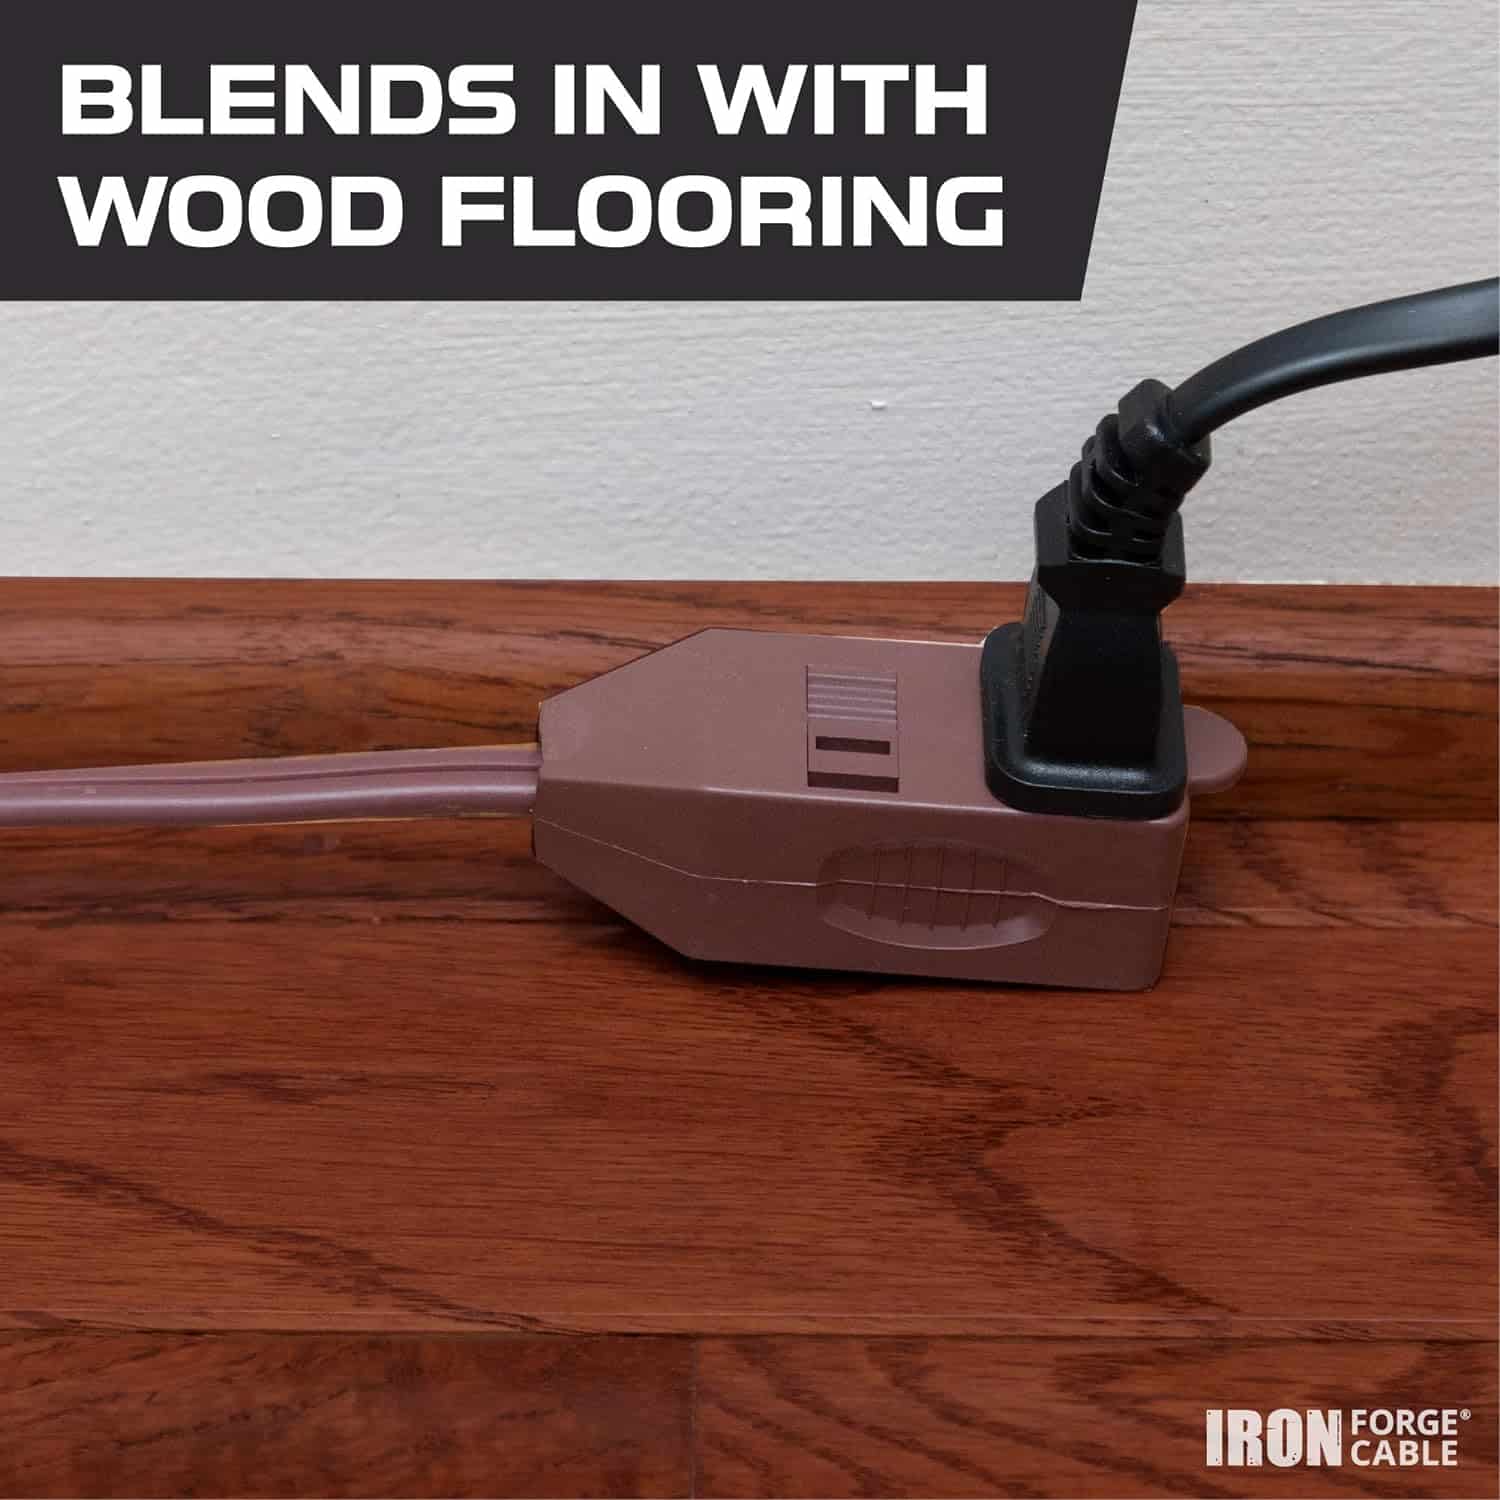 A Iron Forge Cable Brown Extension Cord with 3 Outlets 3 Pack, 10ft 15ft & 20ft, 16/2 Indoor Extension Cord with Multiple Outlets, 13 AMP 2 Prong Electrical Cable for Home, Office, Household Appliances and cable on a wood floor with text stating “blends in with wood flooring” and the iron forge cable logo.